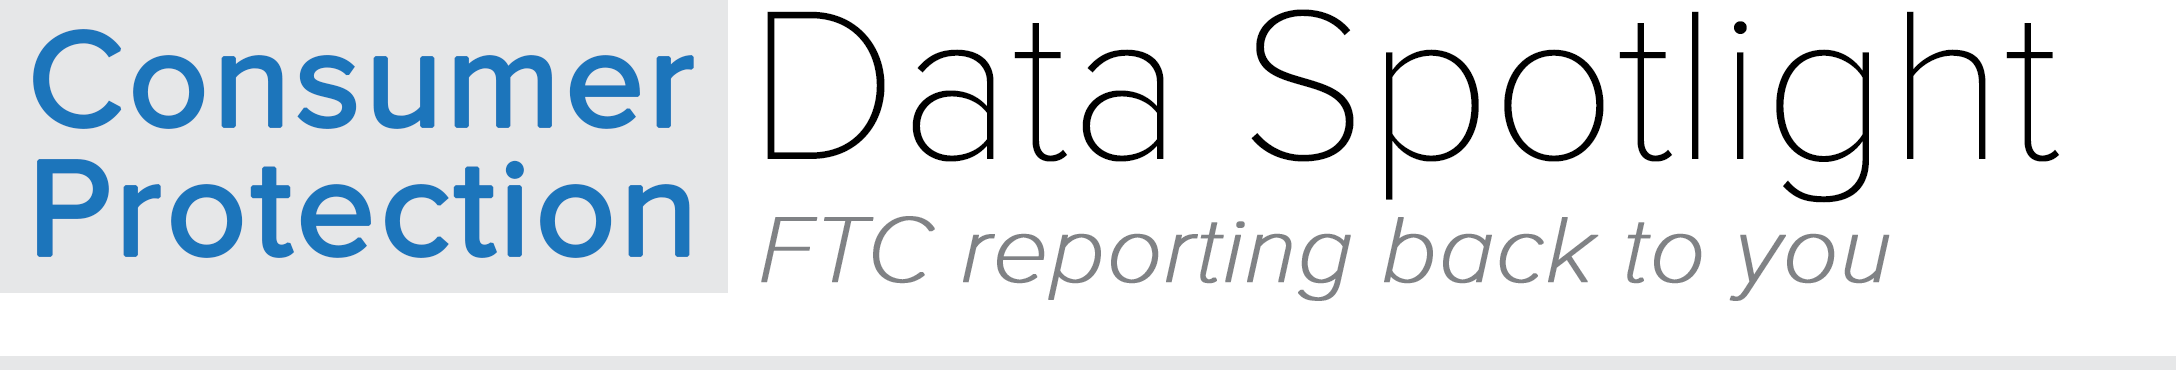 Data Spotlight Blog: FTC reporting back to you